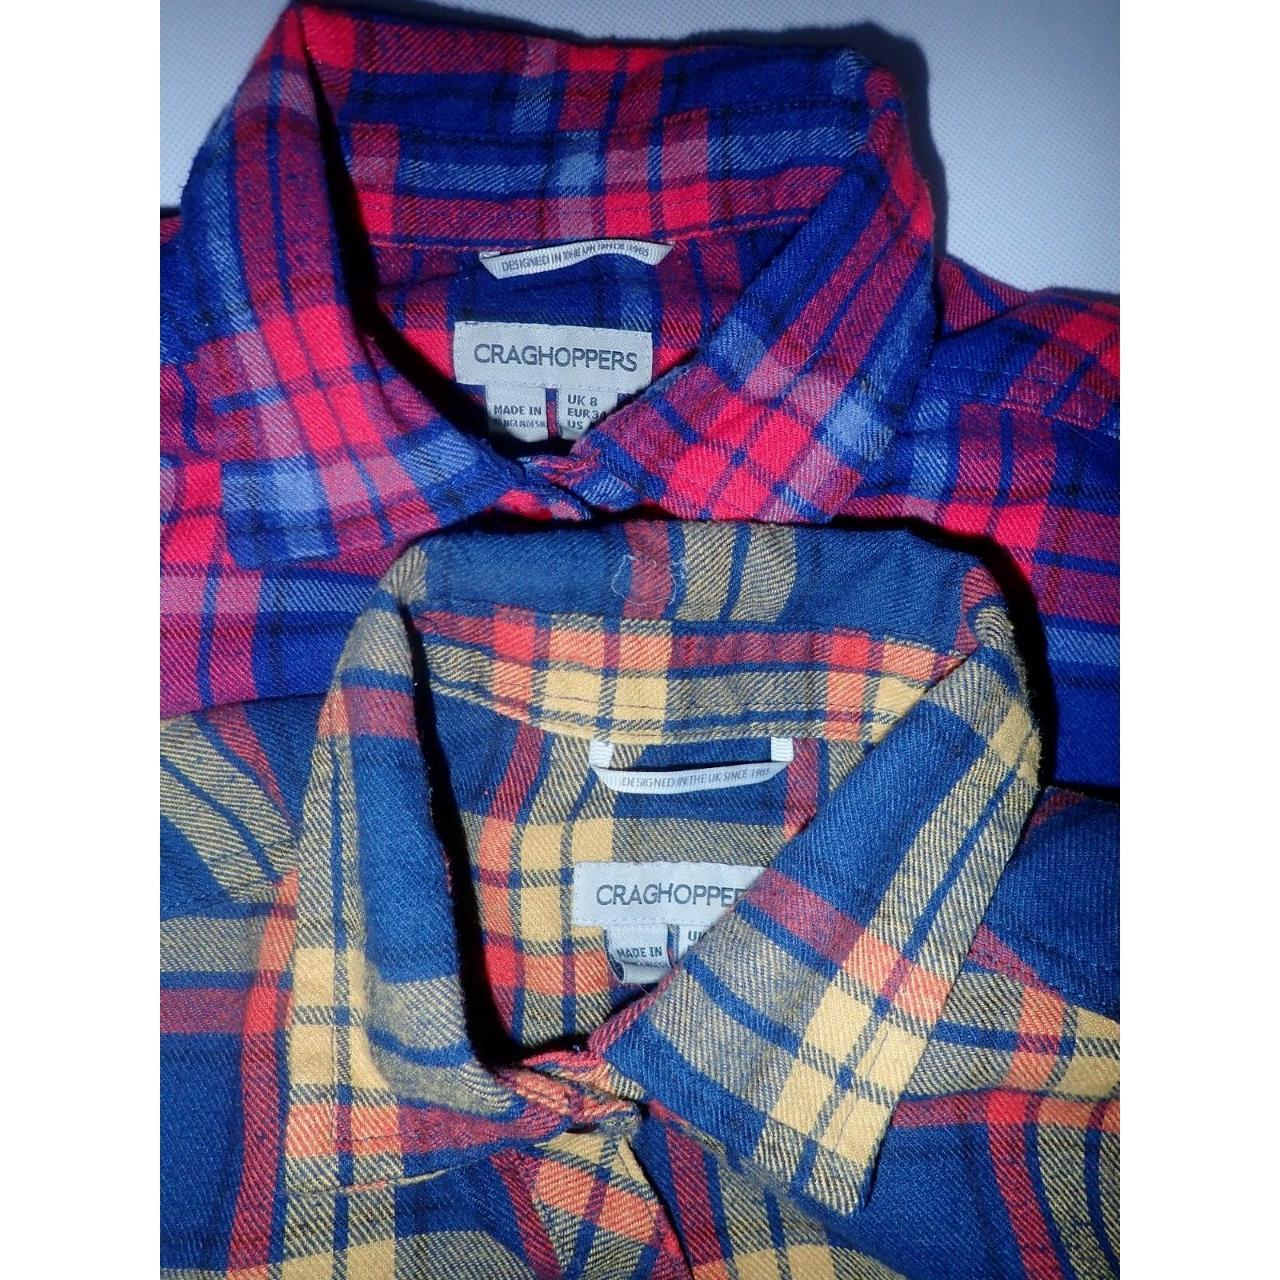 Product Image 3 - LOT Craghoppers Flannel Shirts Women